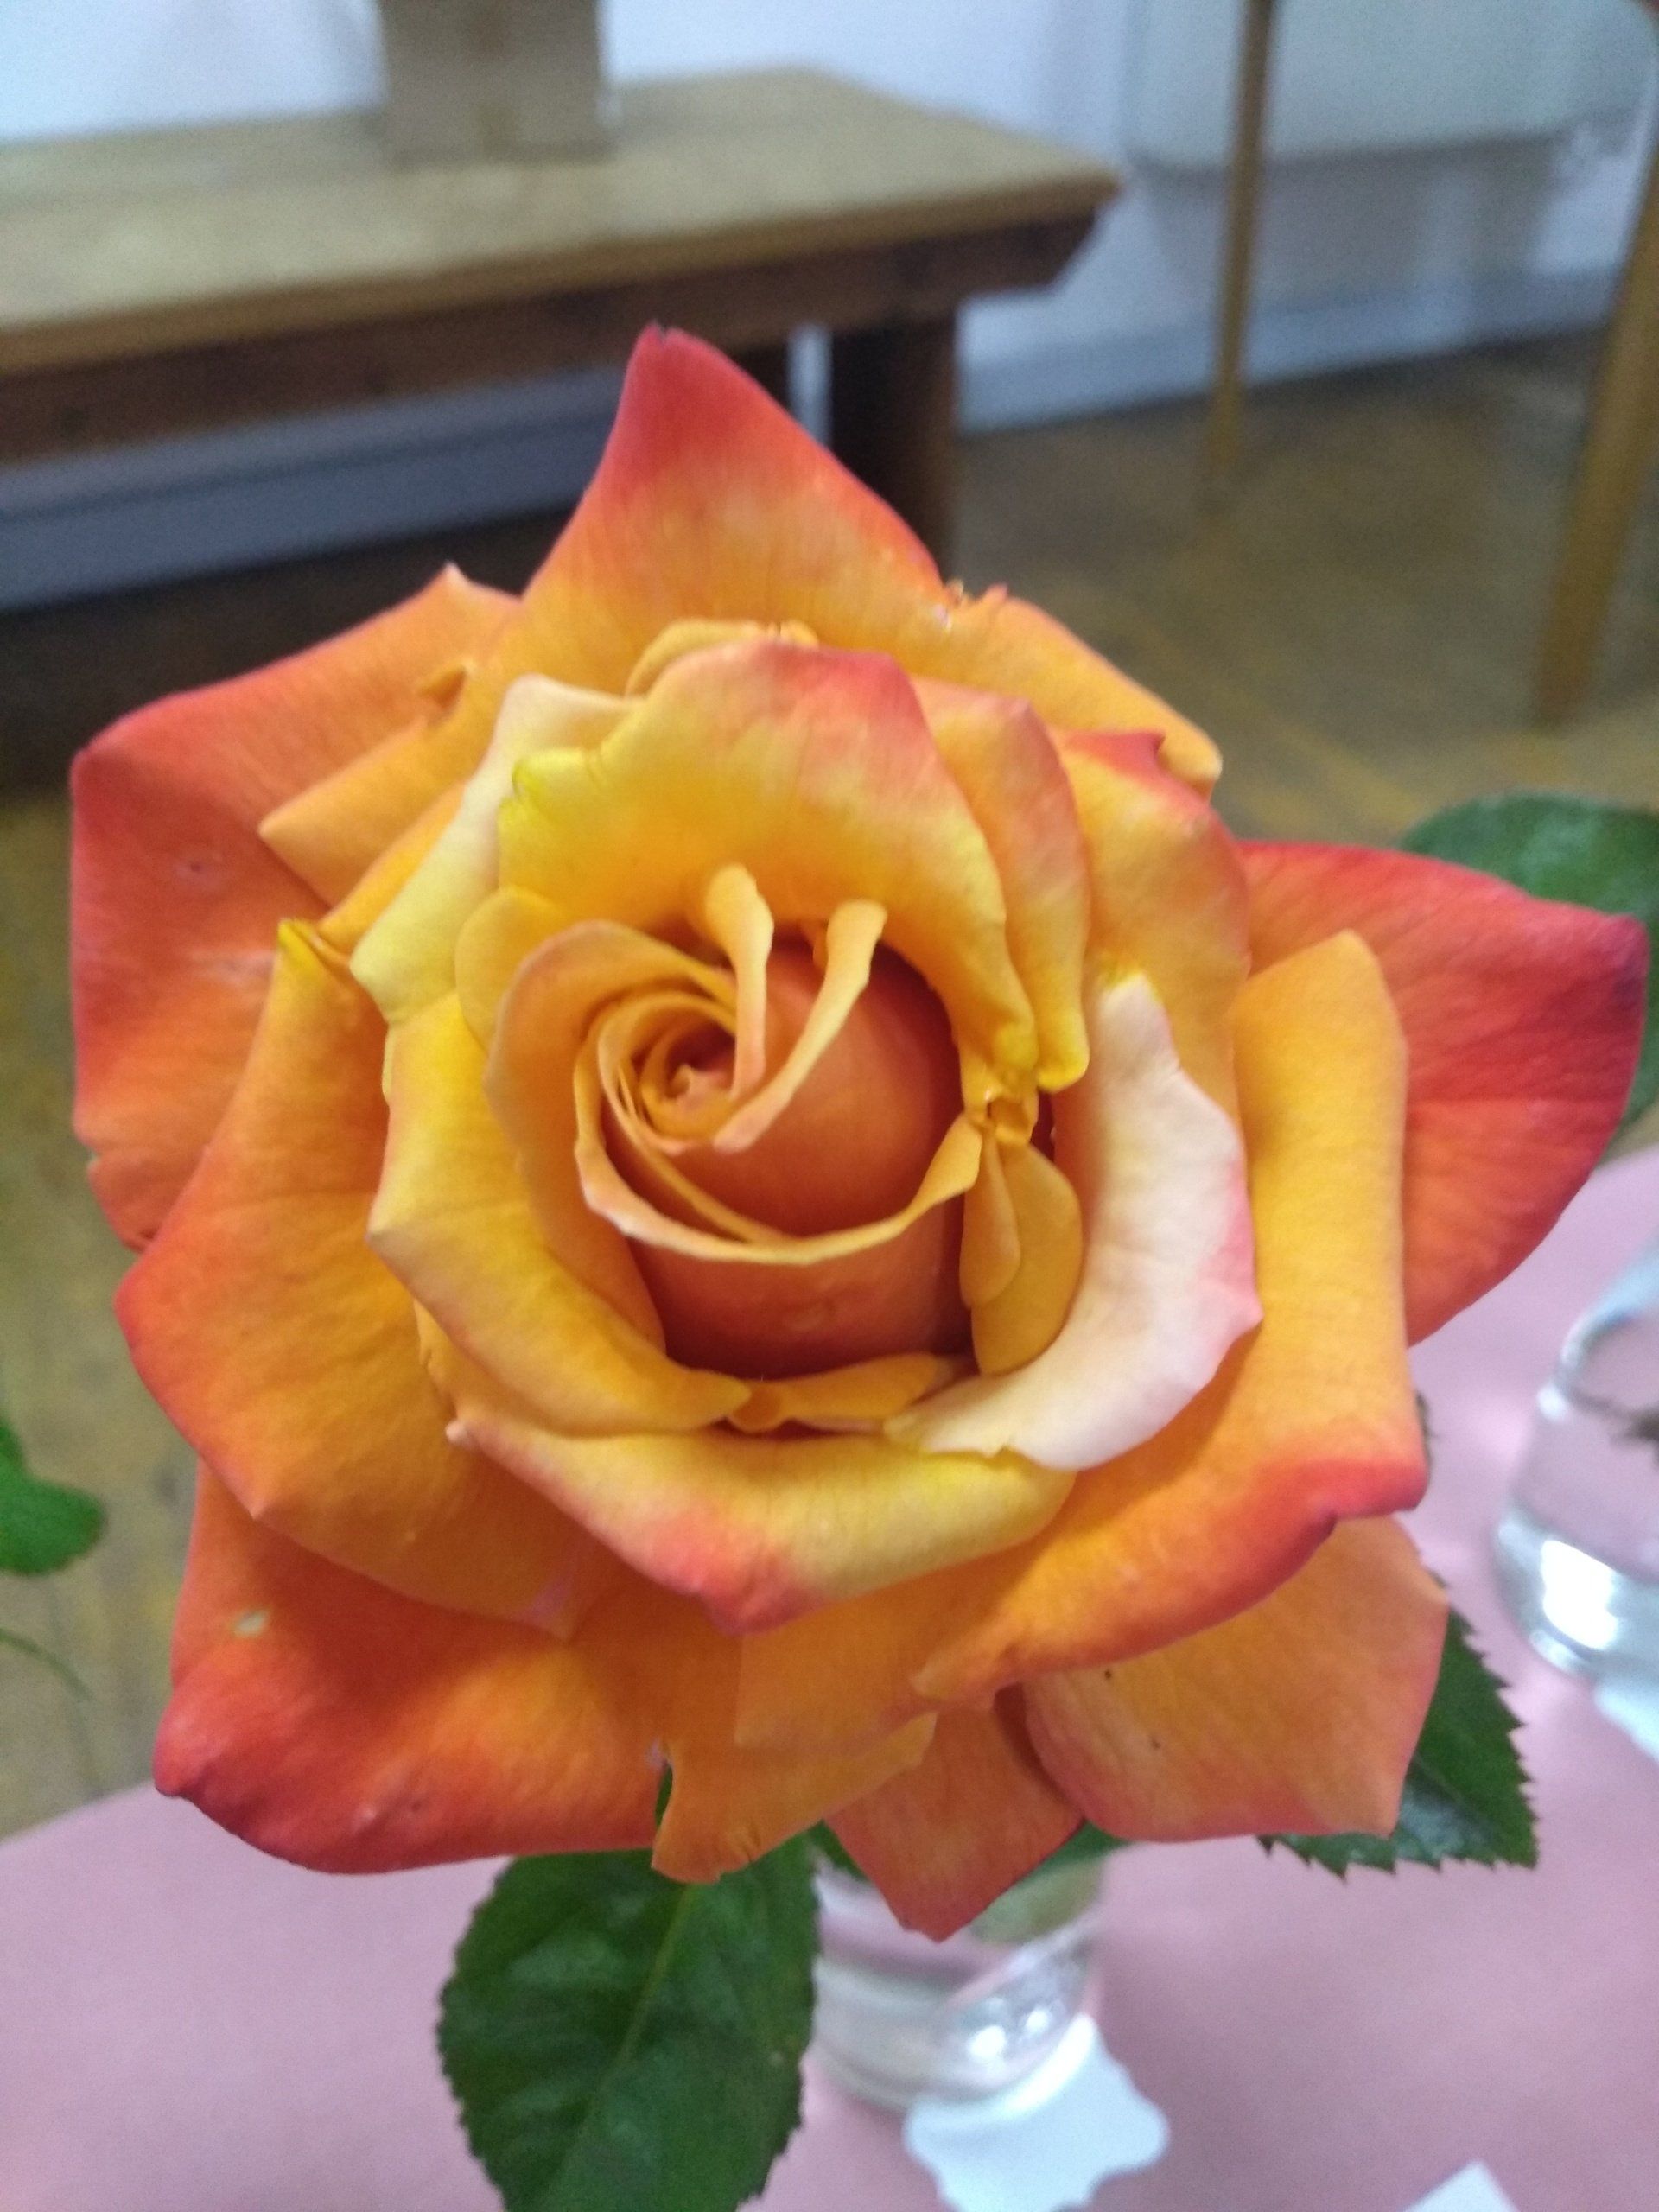 Rose 7 classic form orange and yellow